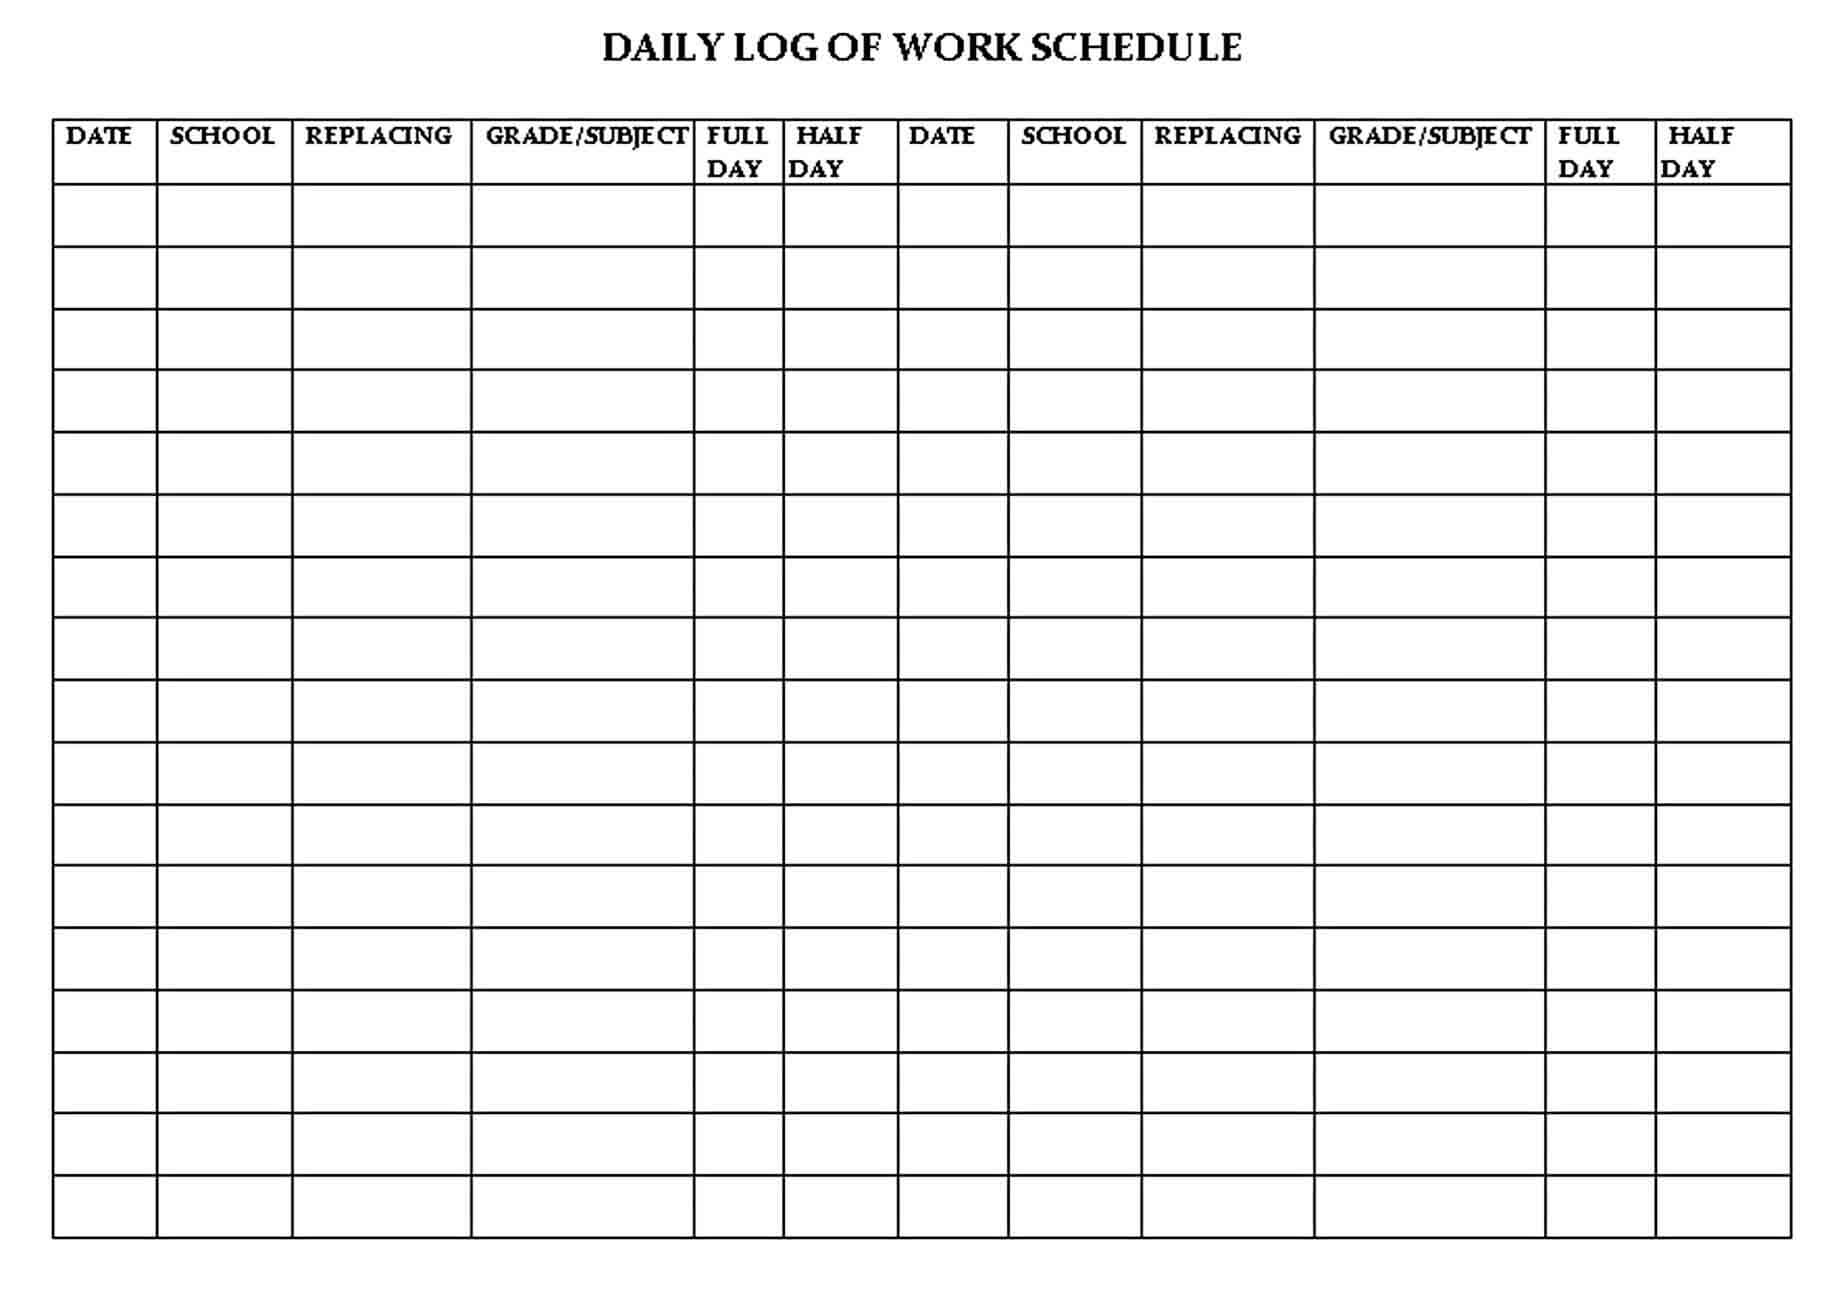 Daily Log of Work Schedule Template in PDF 1